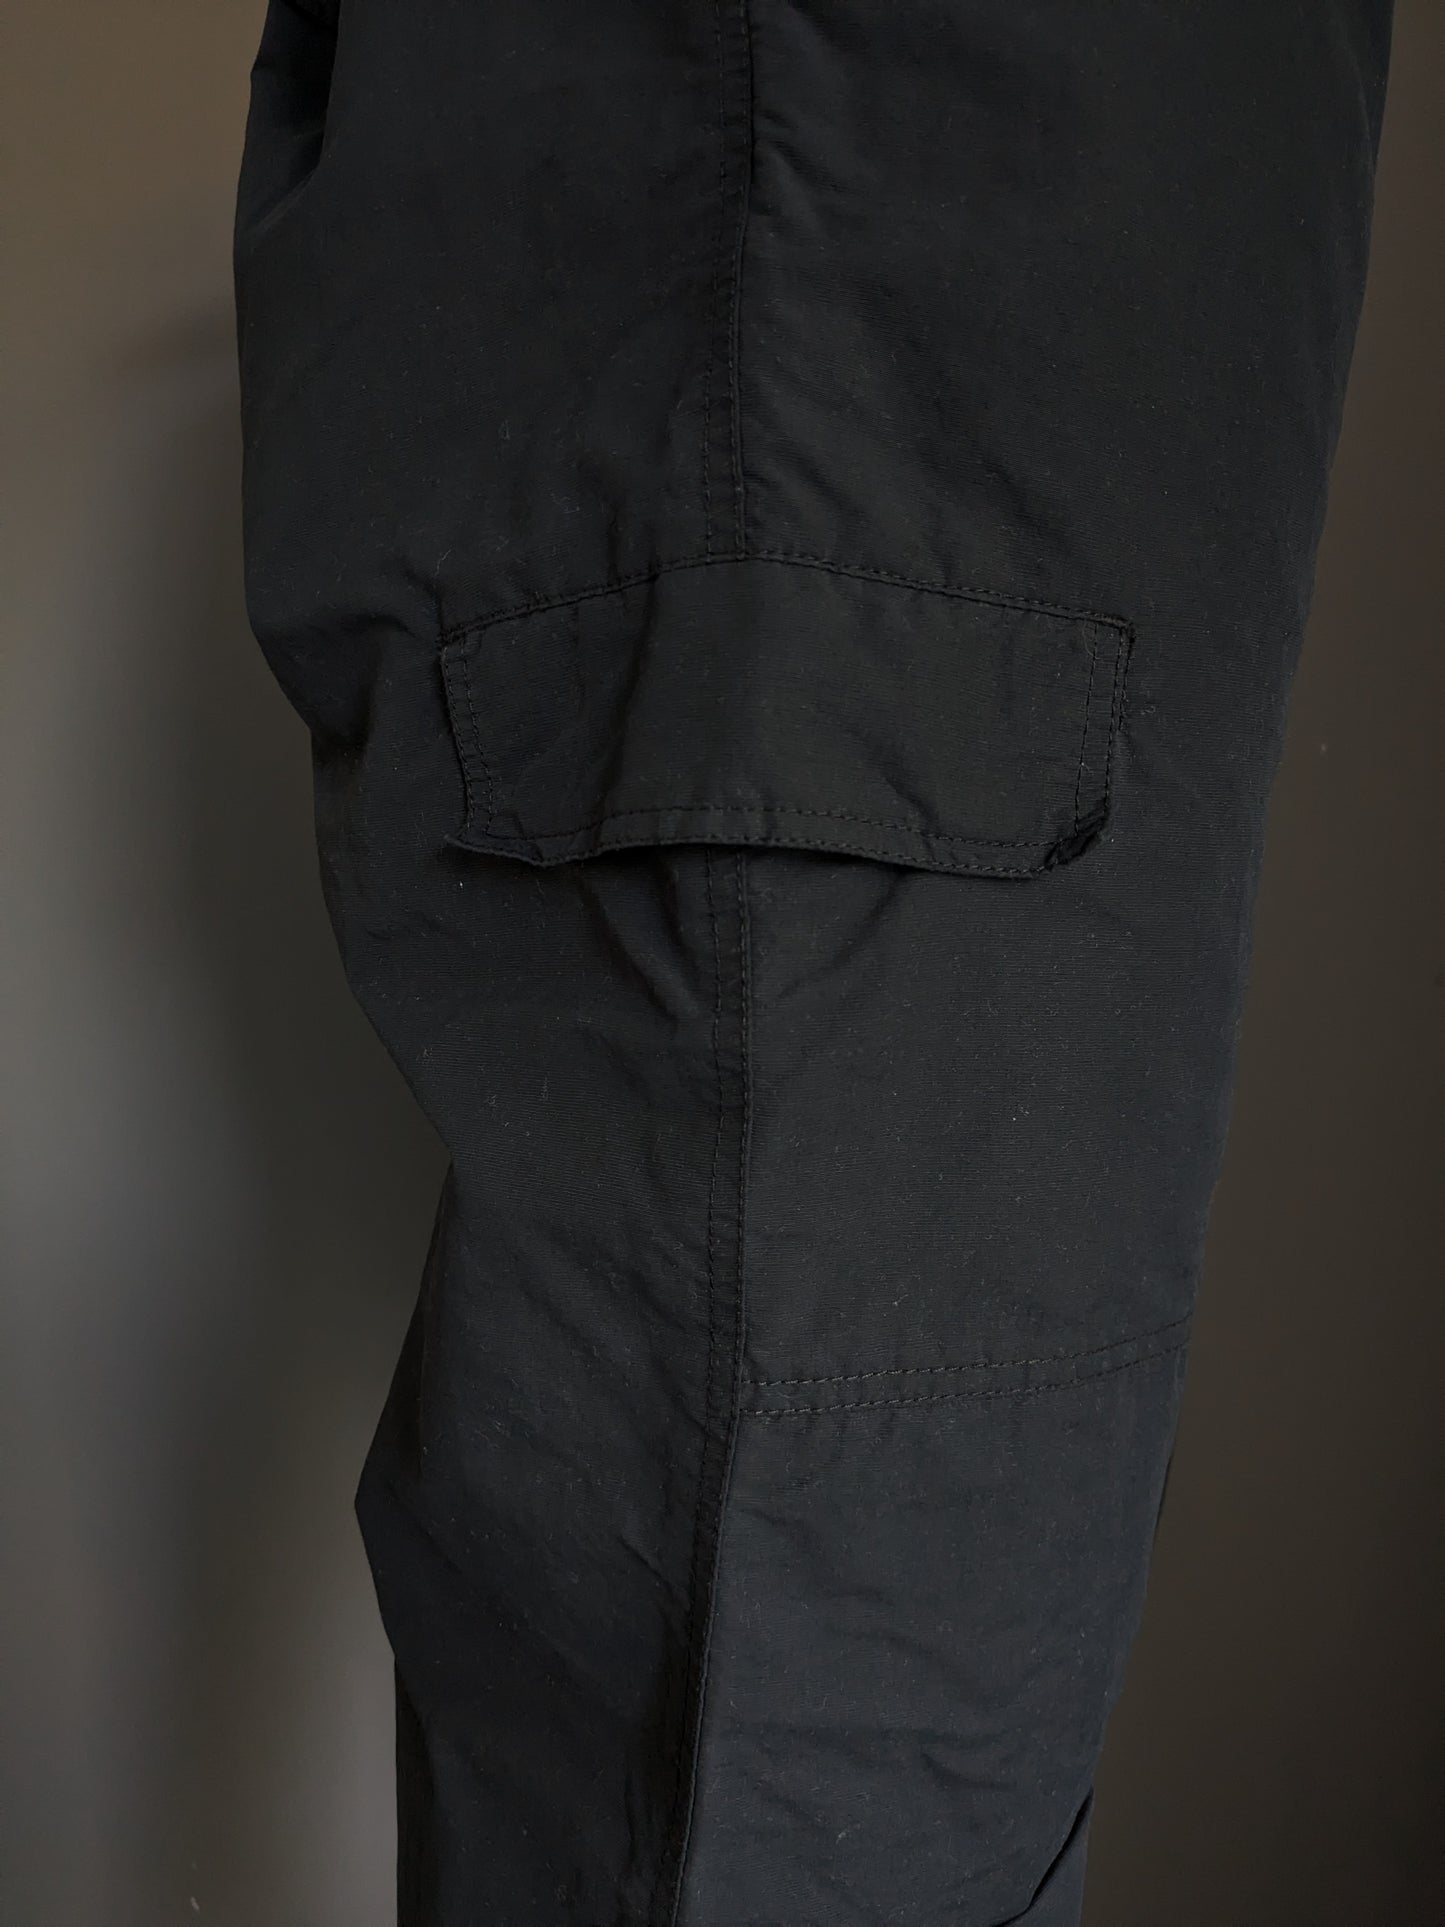 Tenson Outdoor trousers. Soft warm lining. Colored black. Size 54 / L.